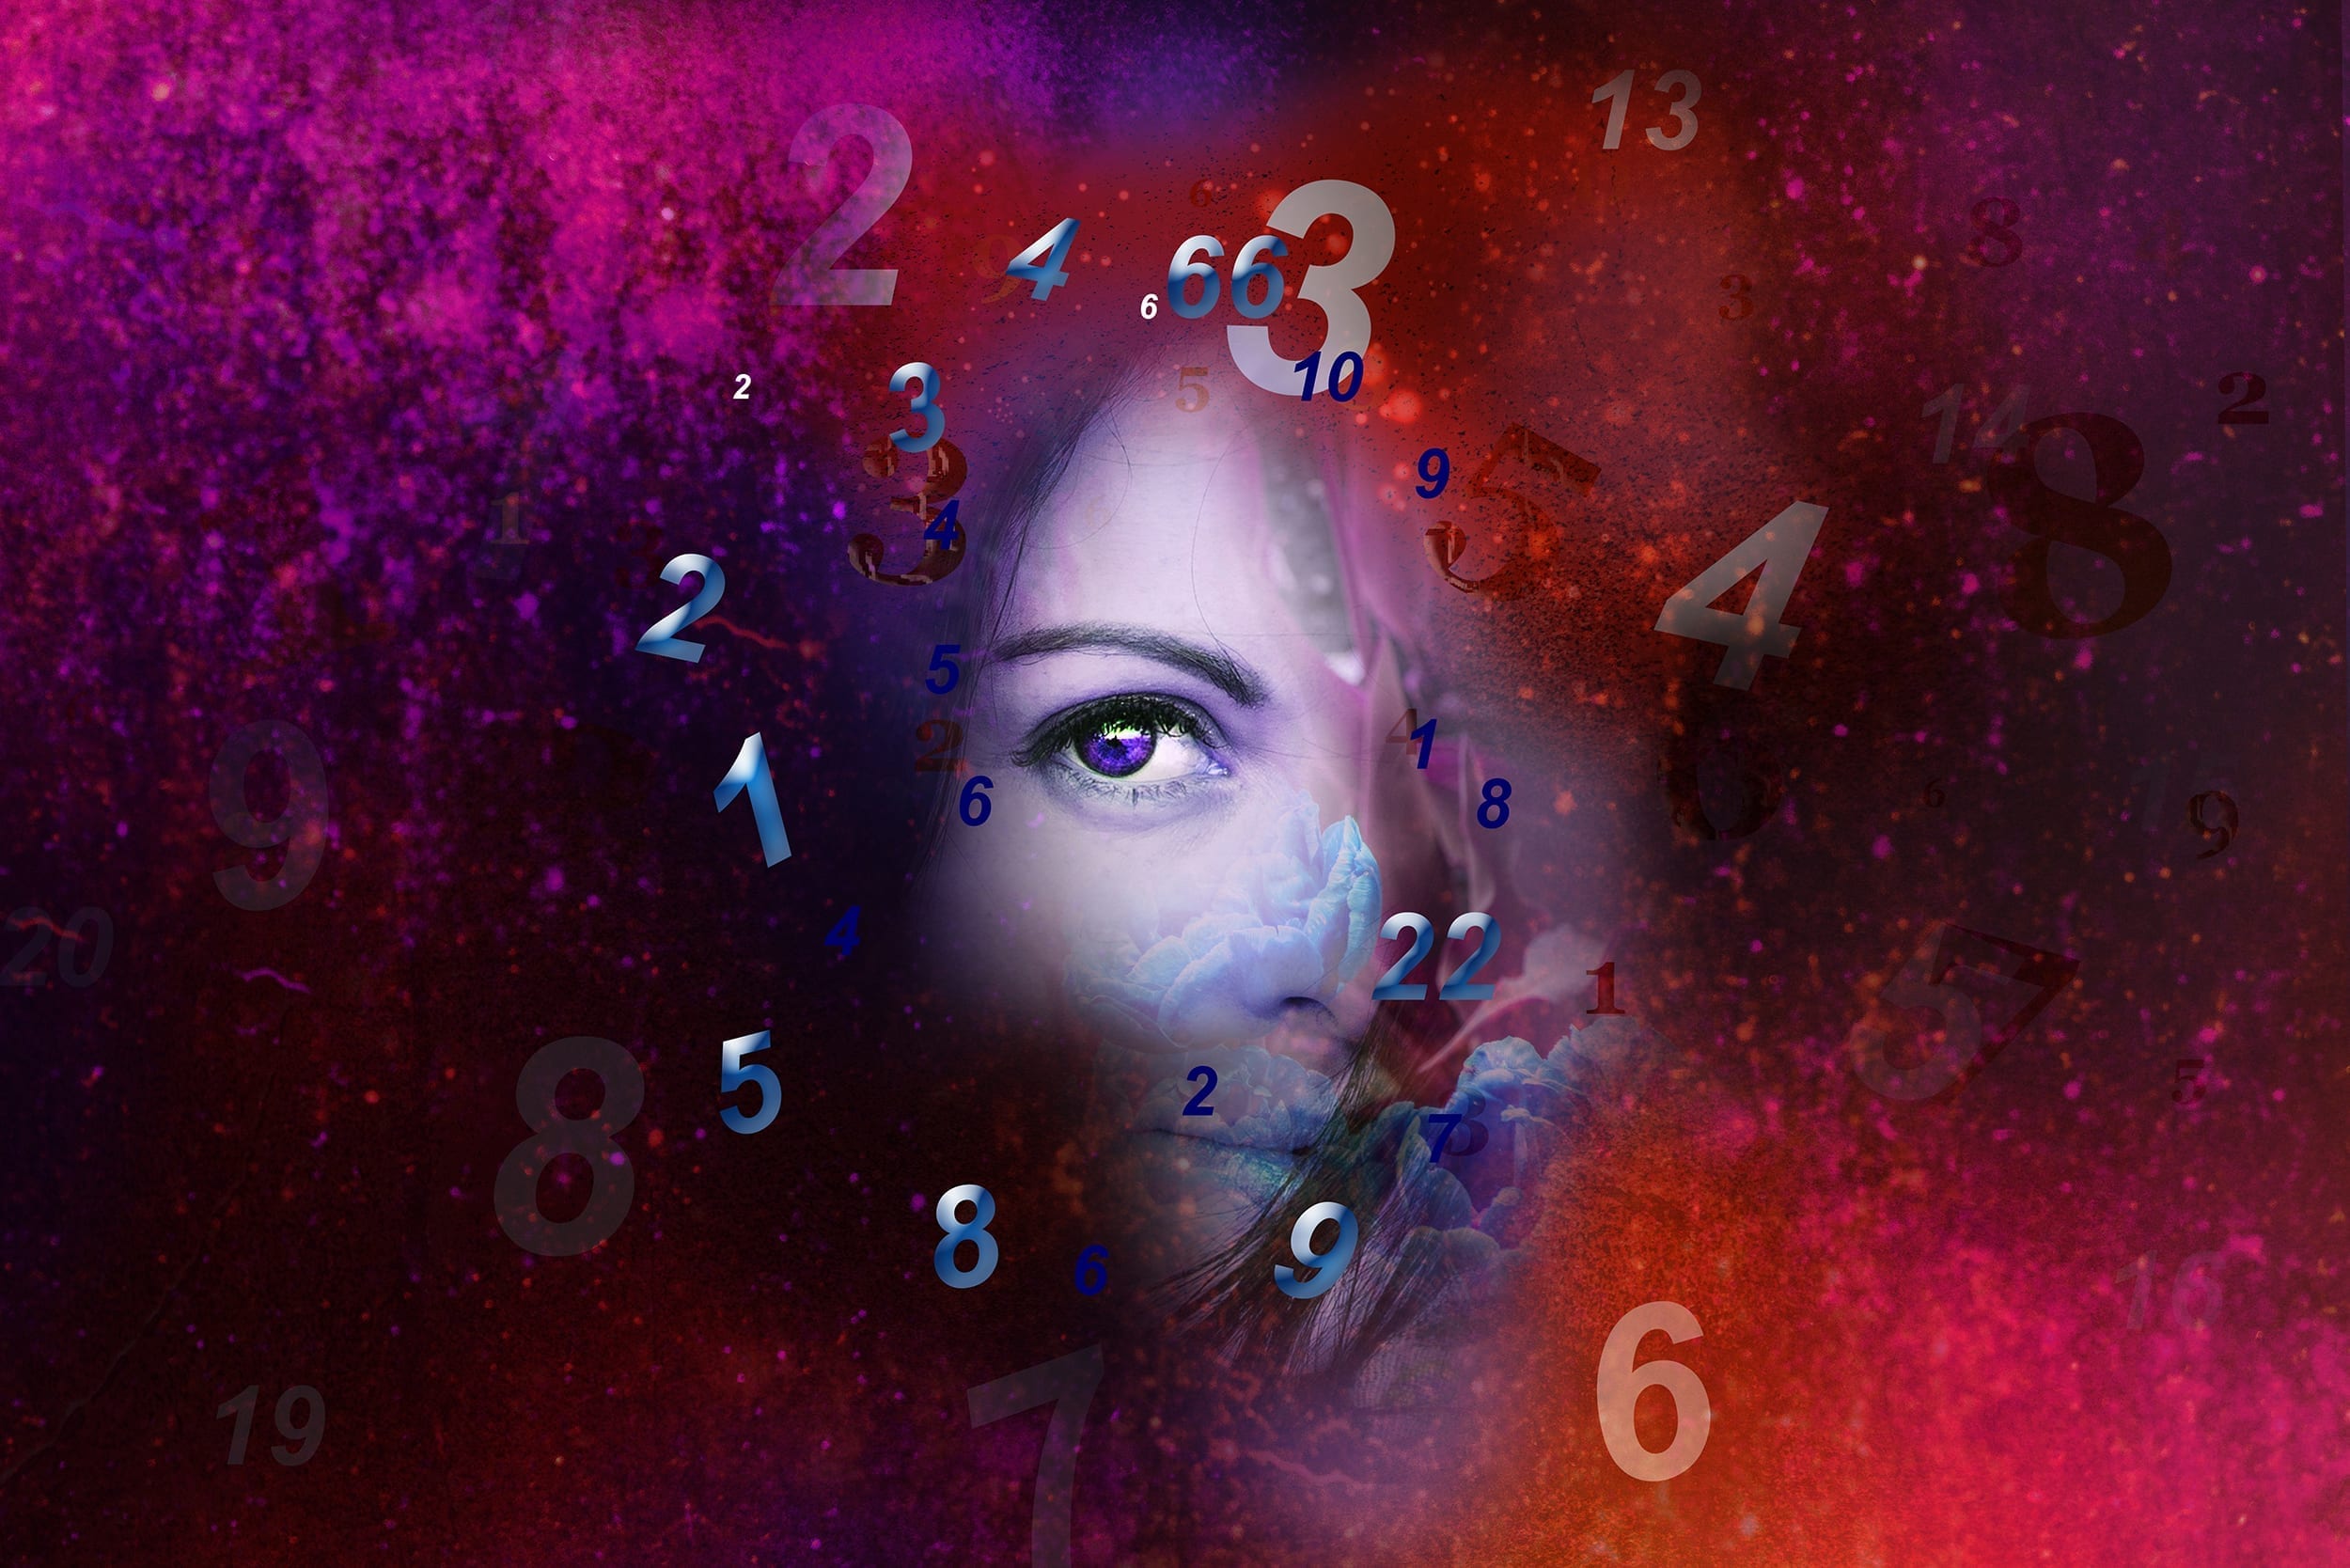 numbers circle womans face in space-time